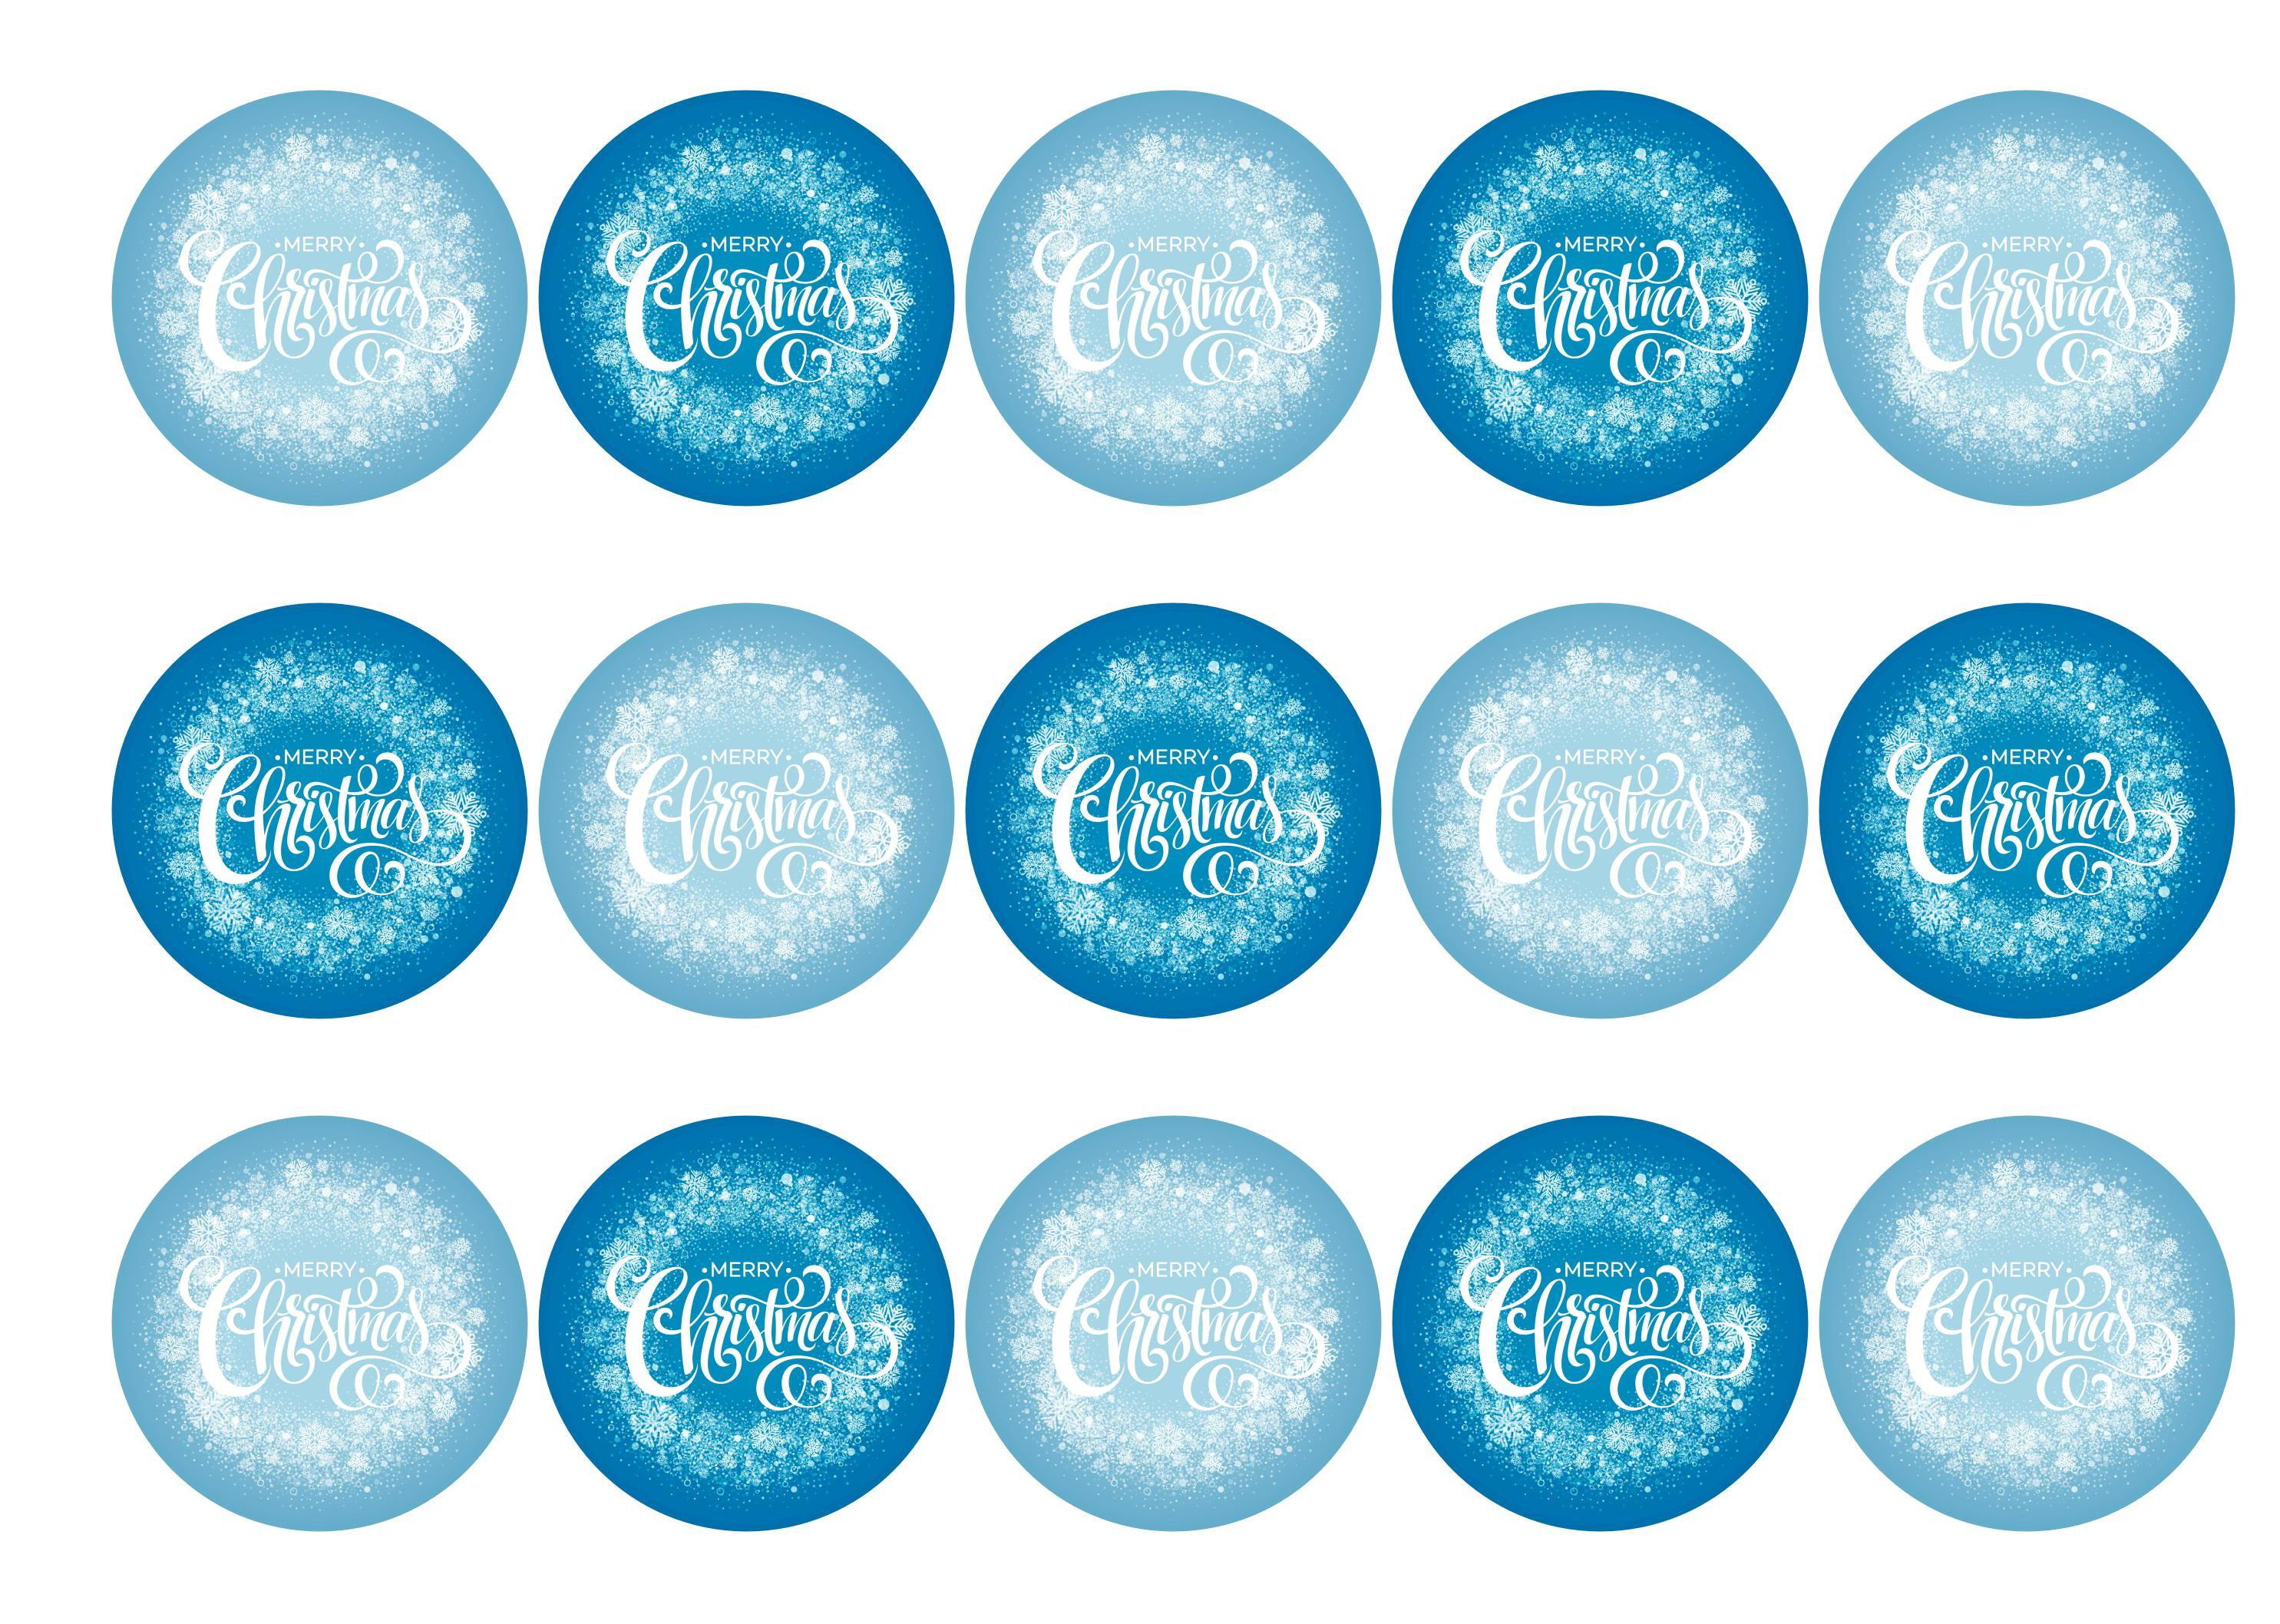 15 printed cupcake toppers with Merry Christmas message on a blue snowflake background